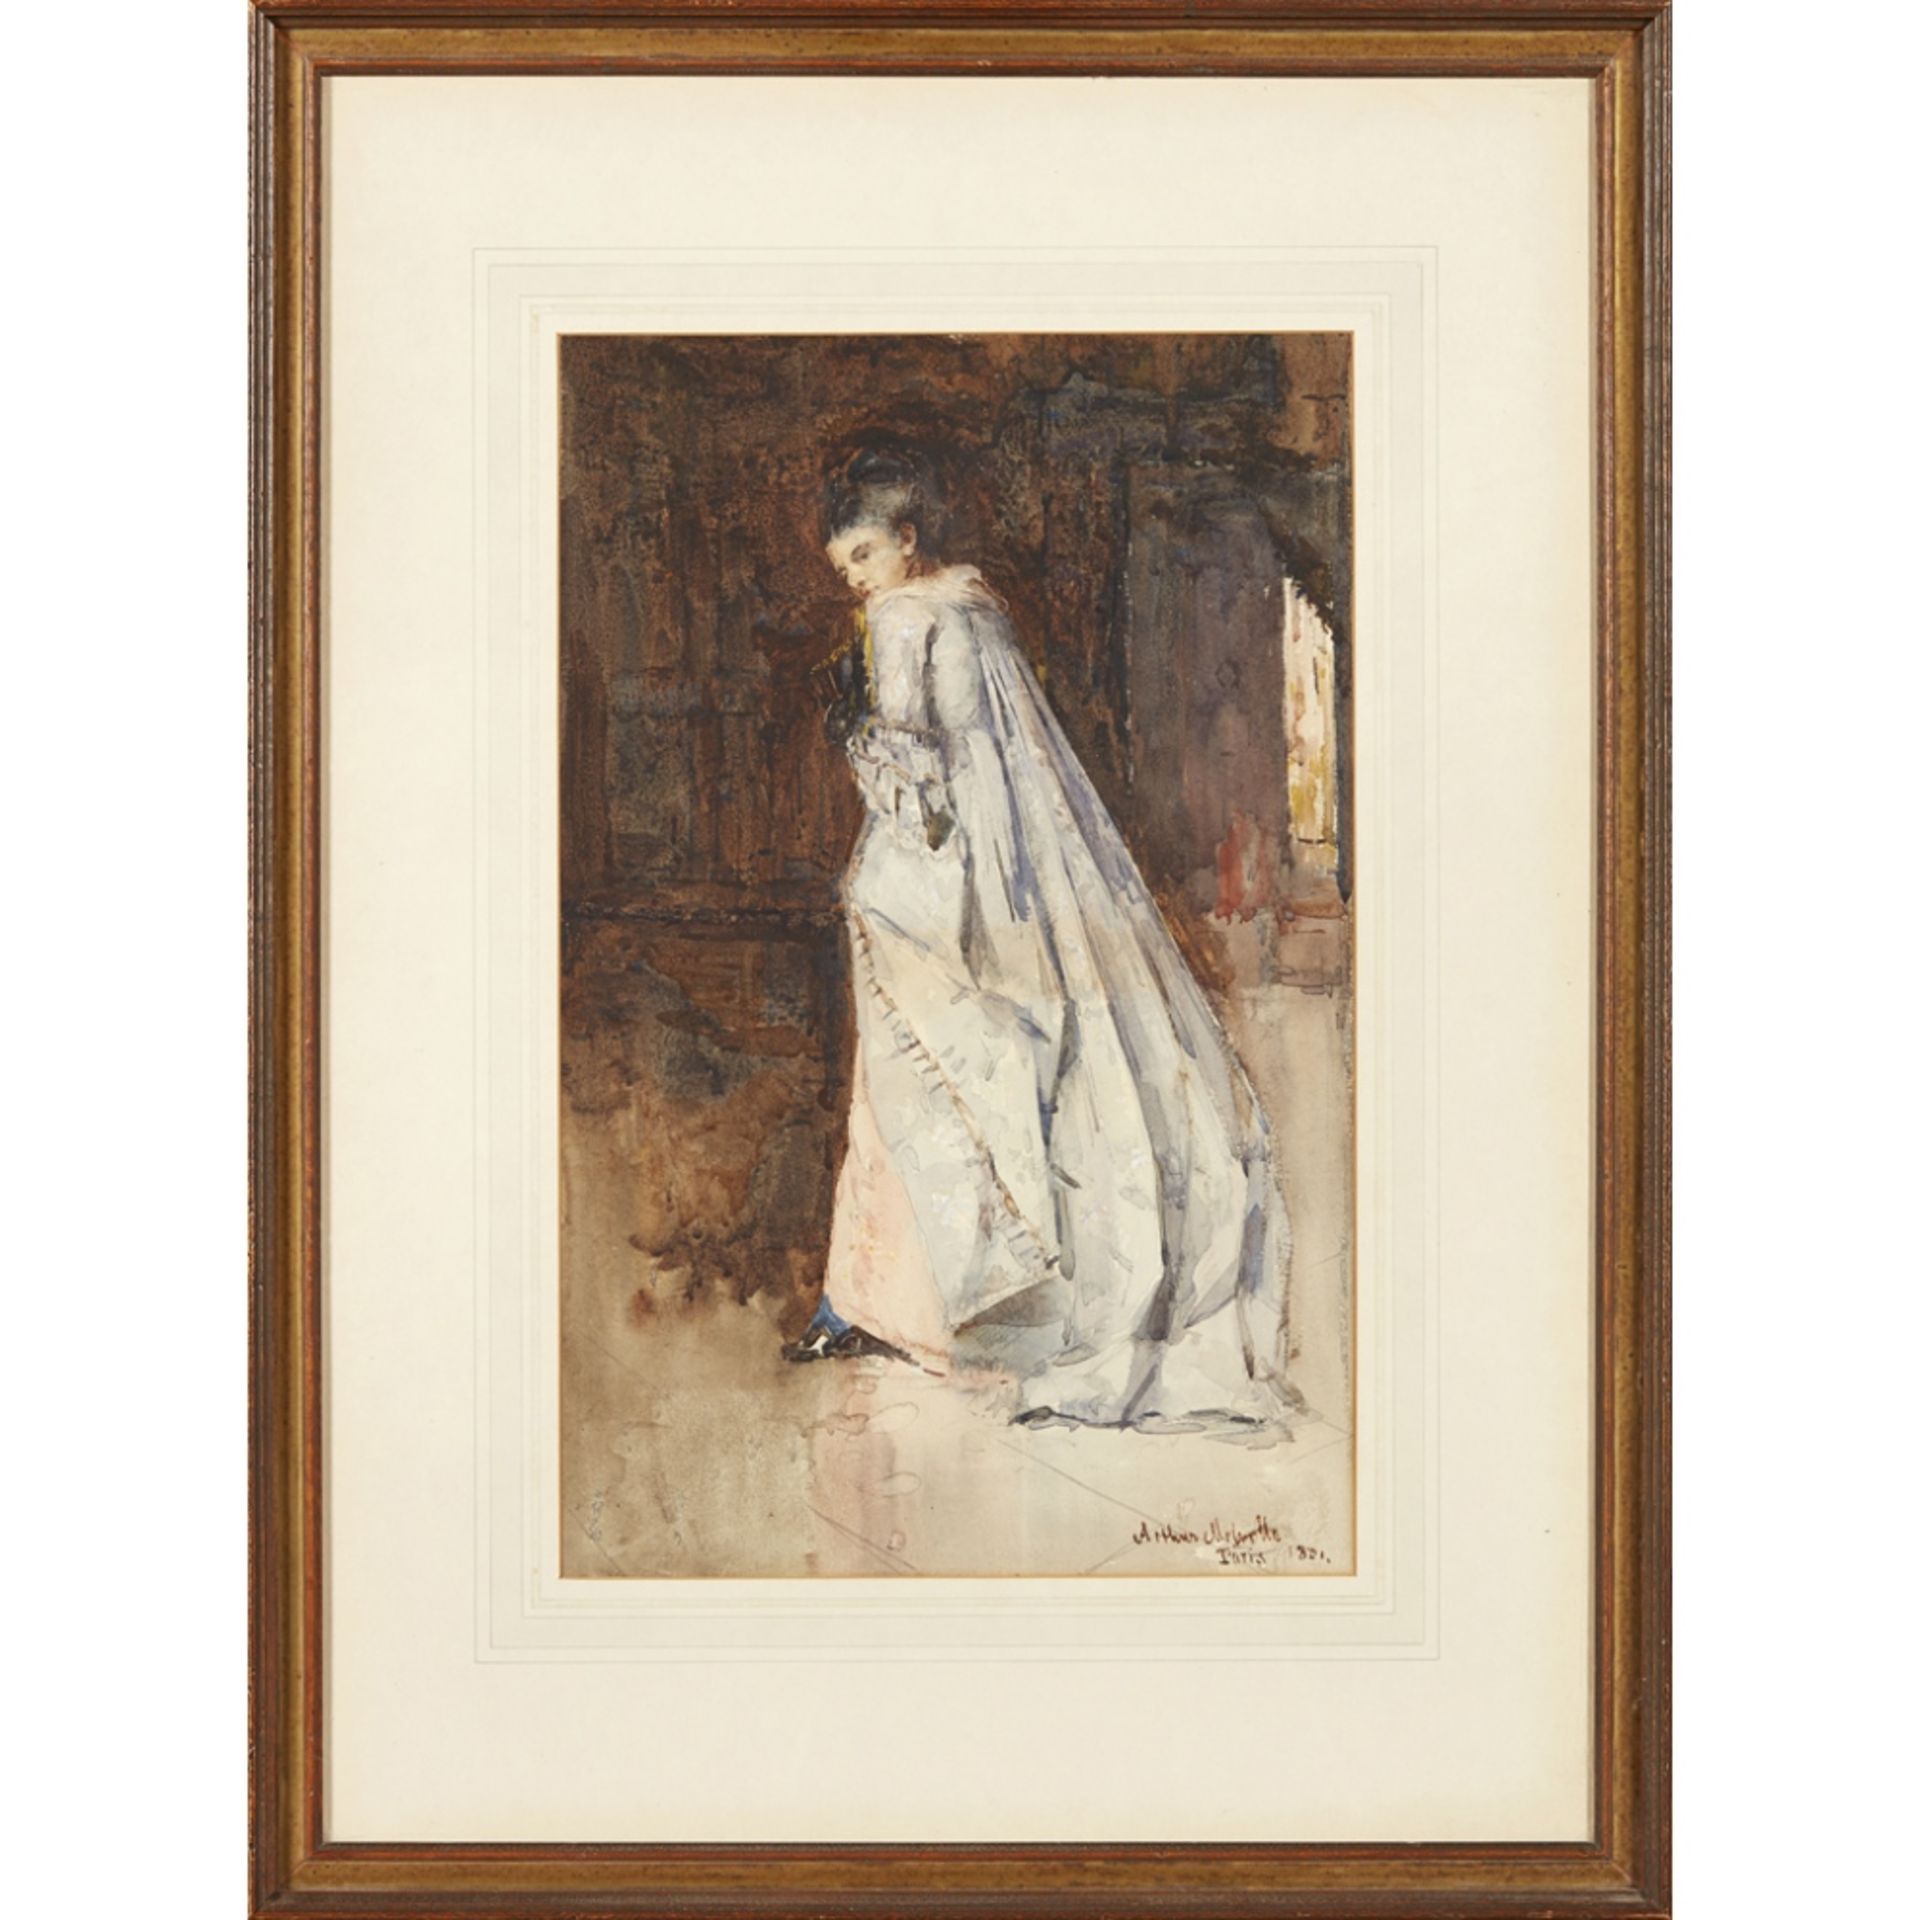 ARTHUR MELVILLE A.R.S.A., R.S.W., A.R.S. (SCOTTISH 1855-1904)WOMAN IN WHITE Signed, inscribed and - Image 2 of 2